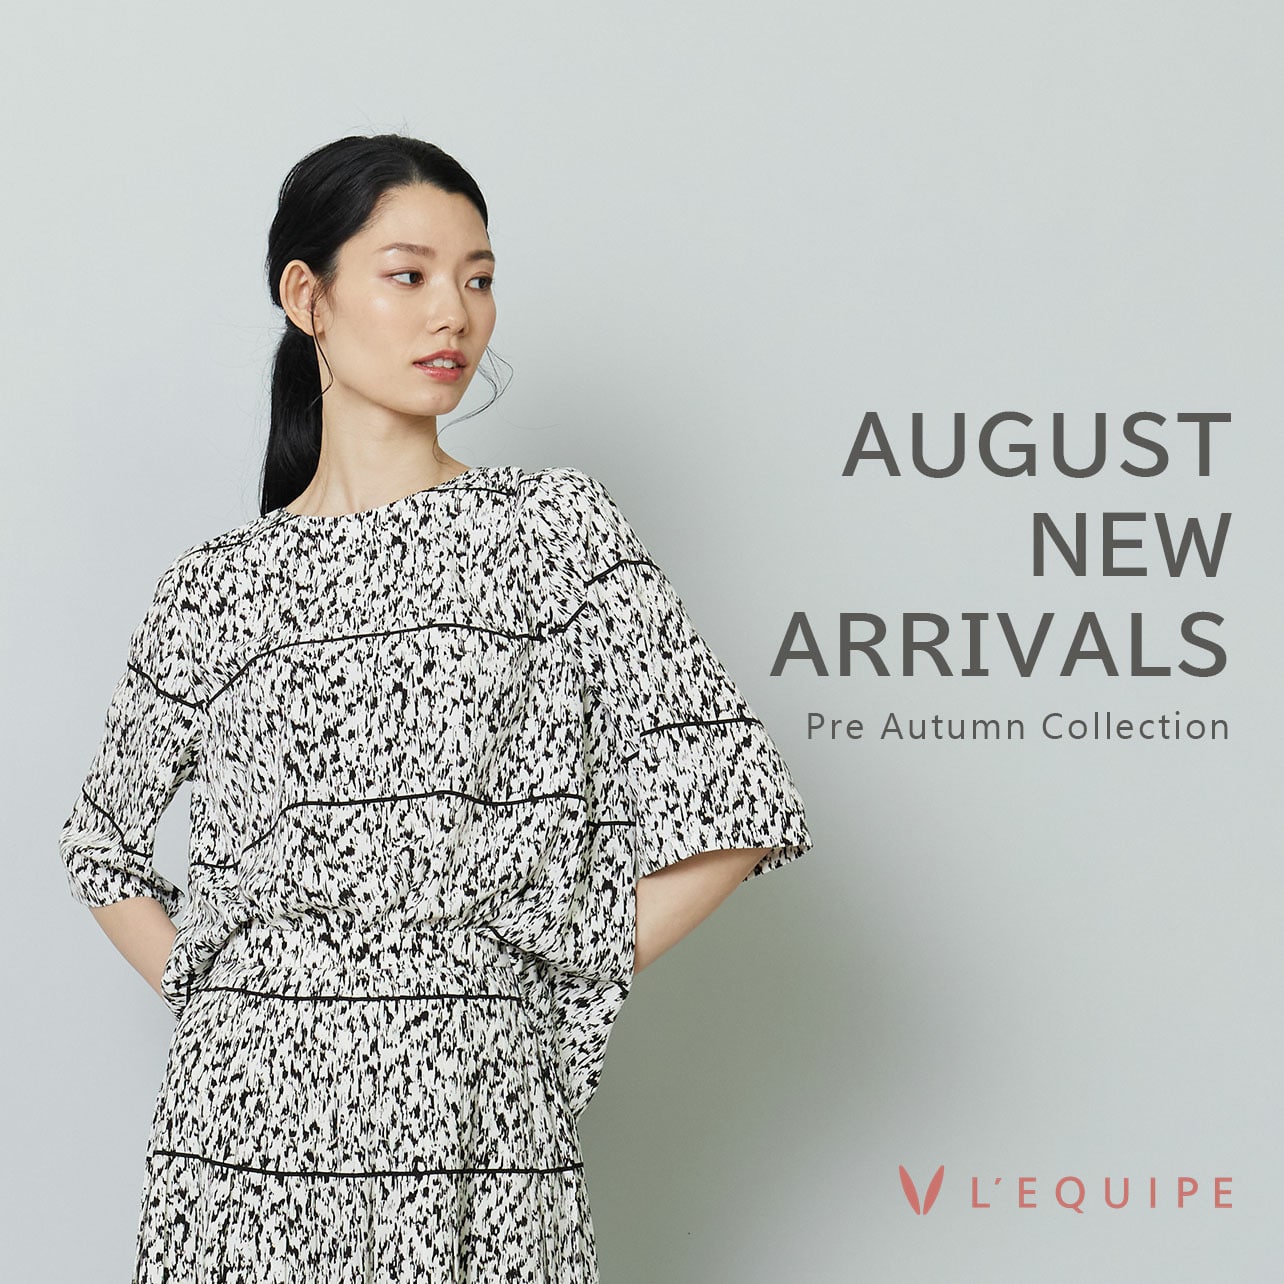 AUGUST NEW ARRIVALS